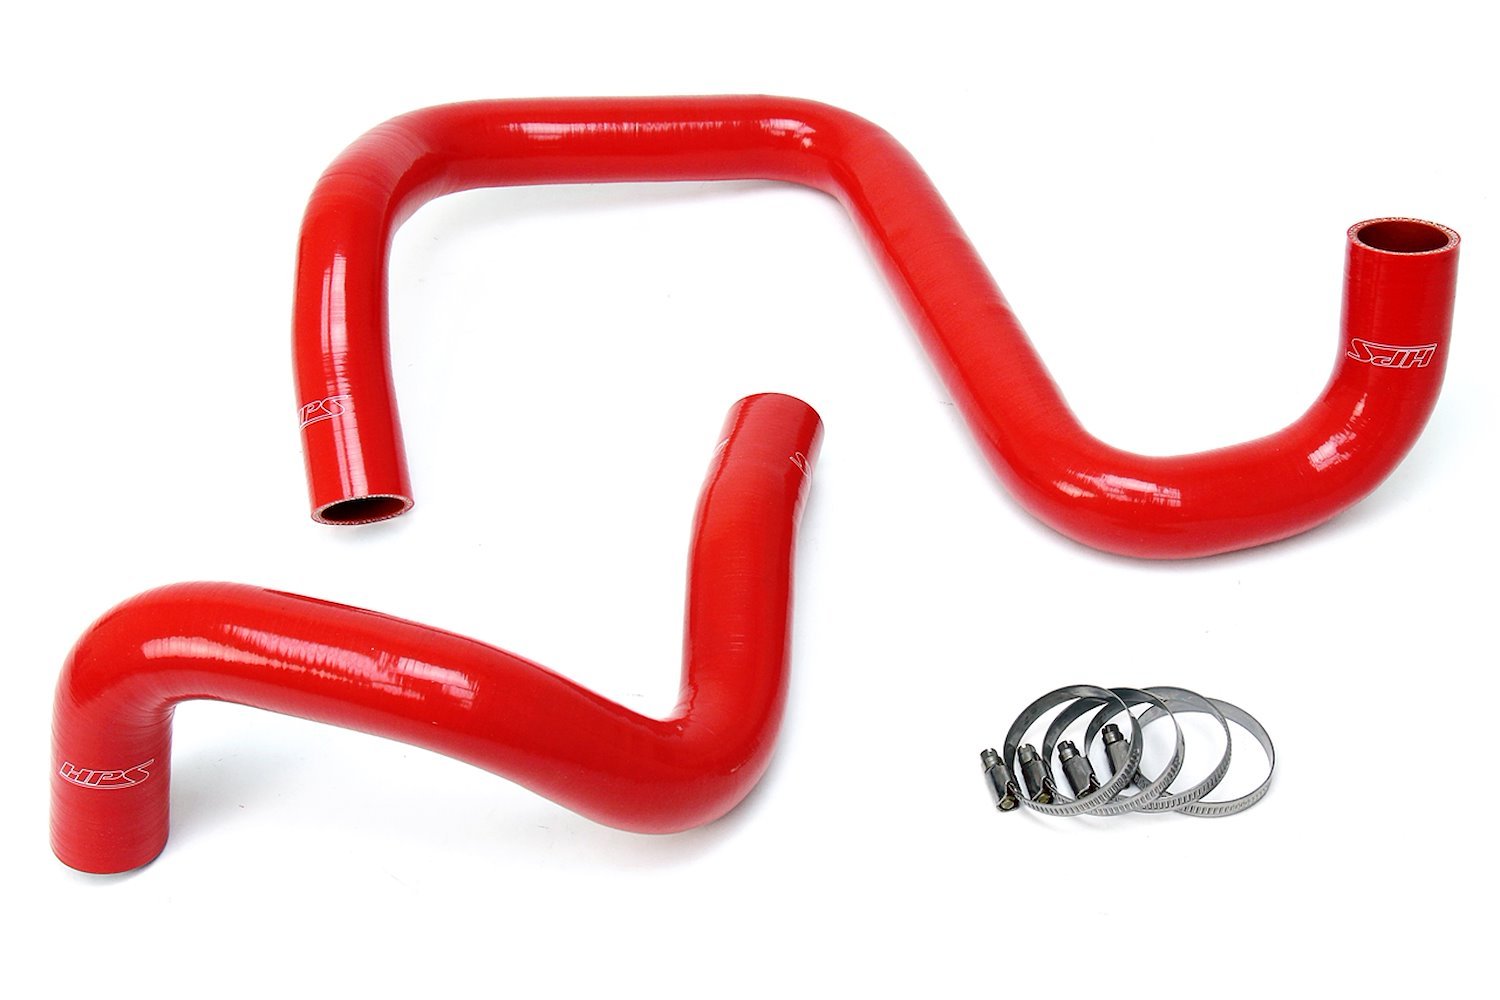 57-1285R-RED Radiator Hose Kit, High-Temp 3-Ply Reinforced Silicone, Replace OEM Rubber Radiator Coolant Hoses